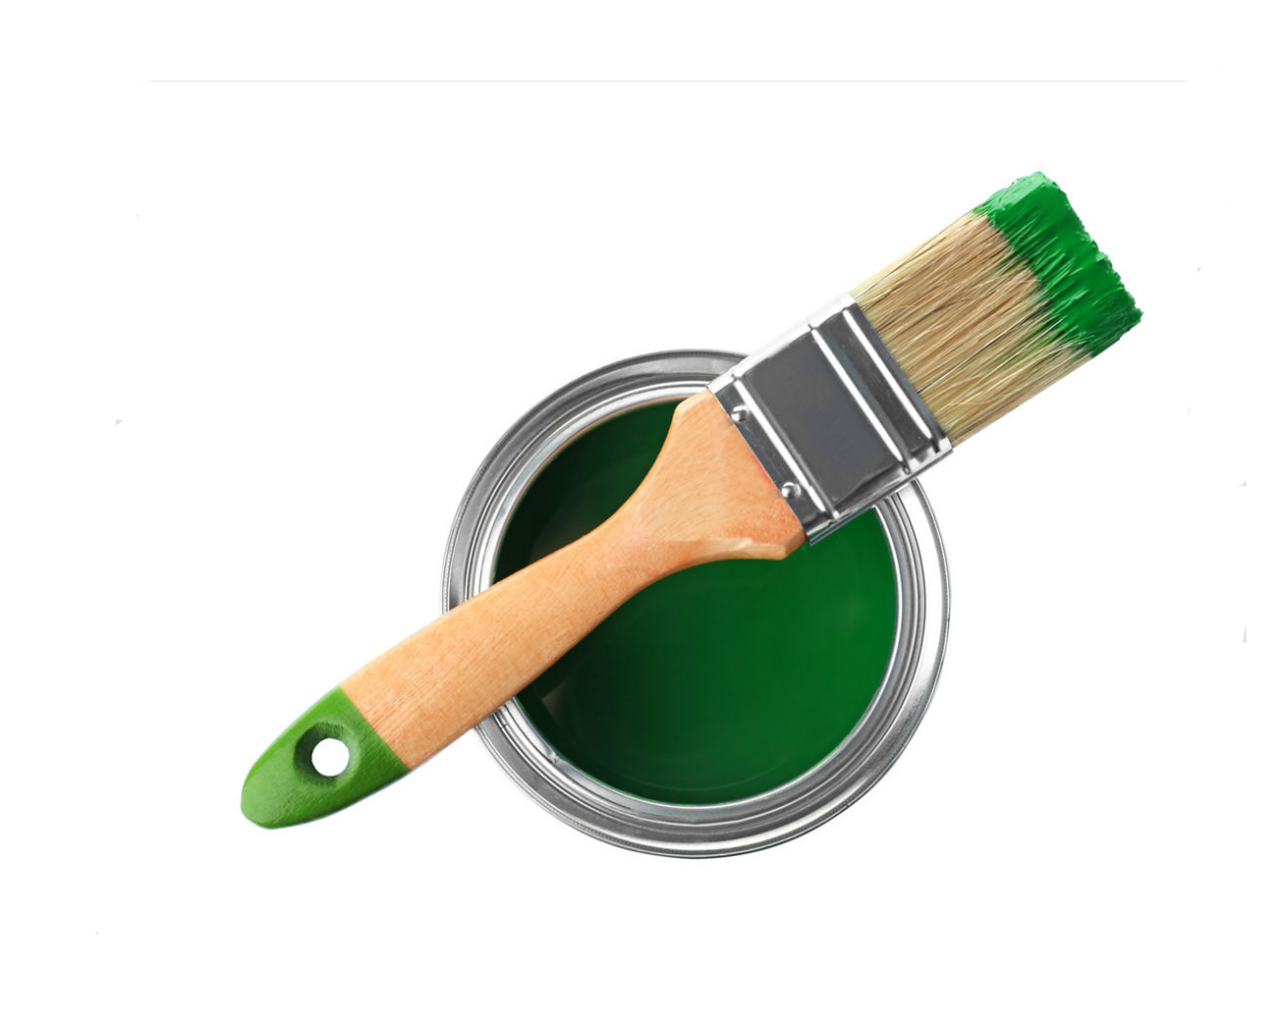 Paint can and brush on white background, top view; Shutterstock ID 1293322108; purchase_order: CON; job: ; client: ; other: 